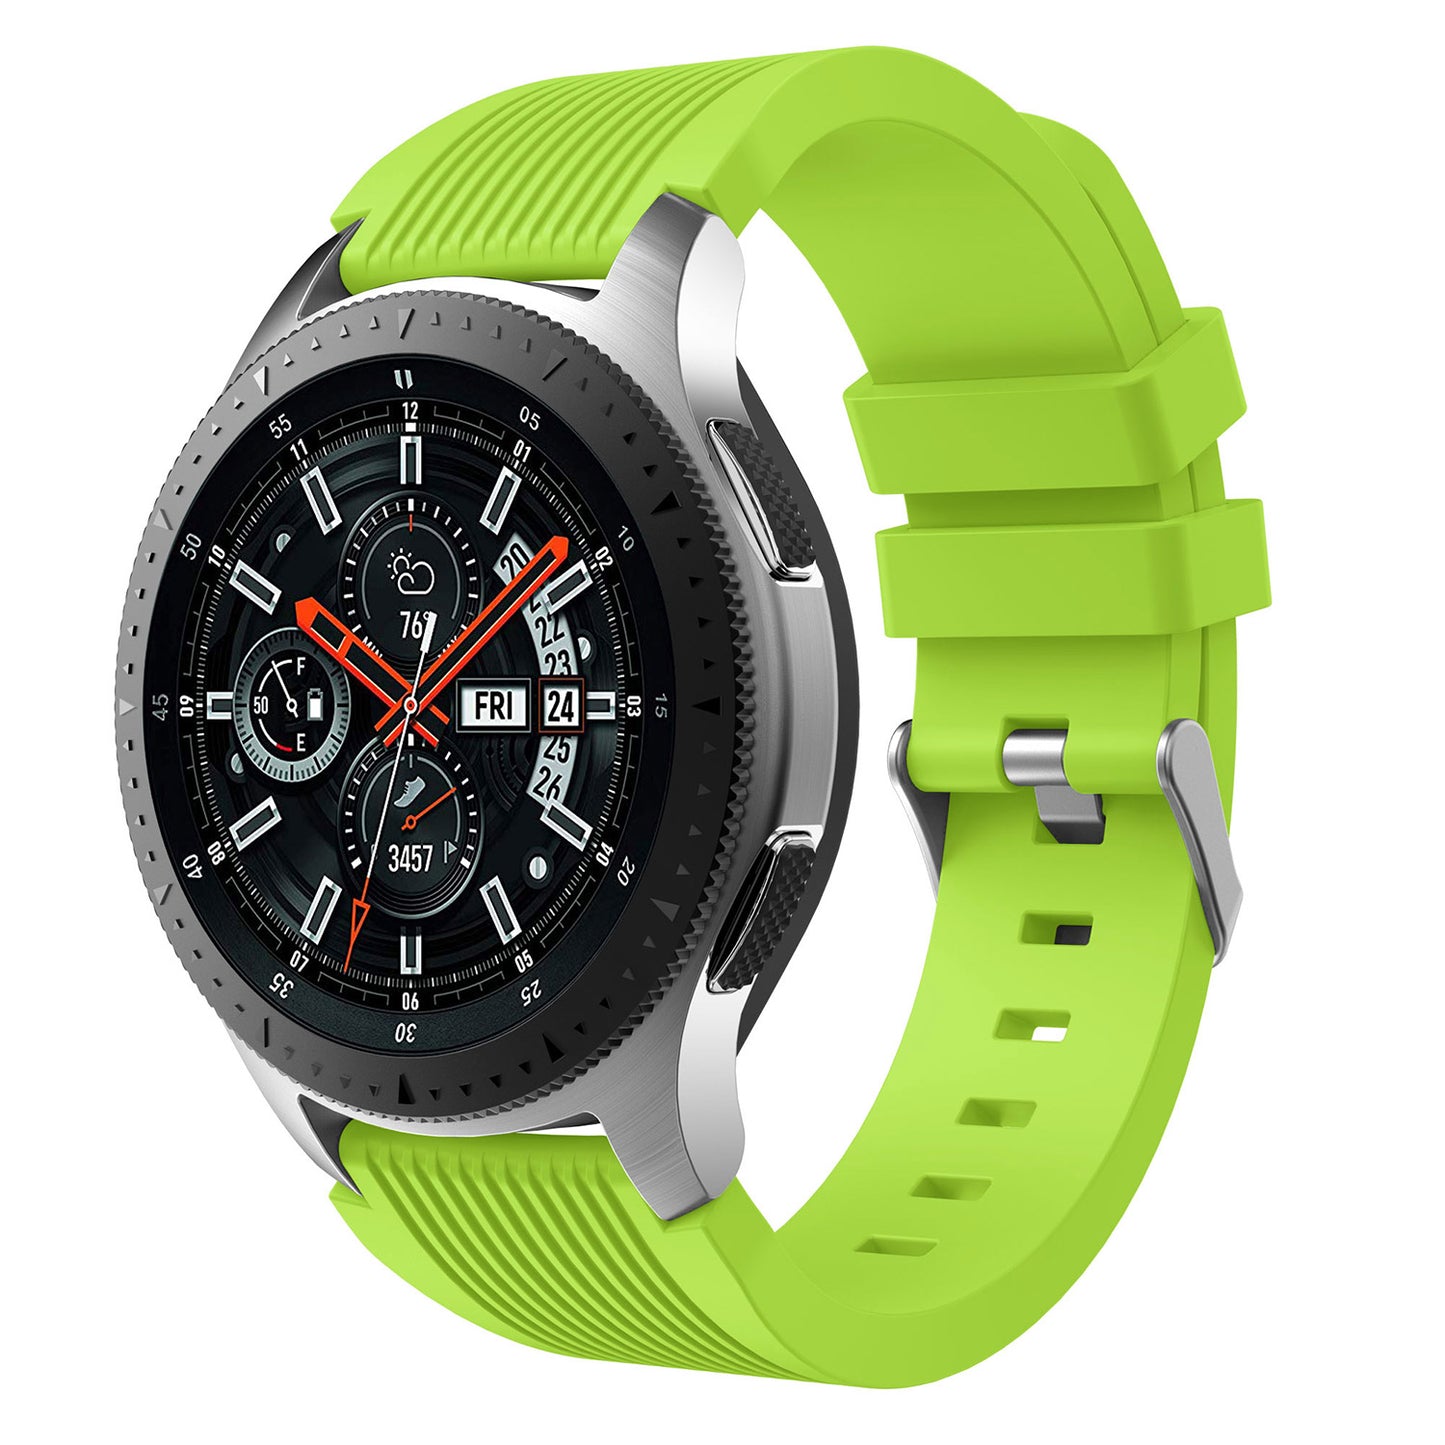 Rubber Strap for Samsung Galaxy Watch 42mm / Galaxy Watch Active / Gear S2 Classic